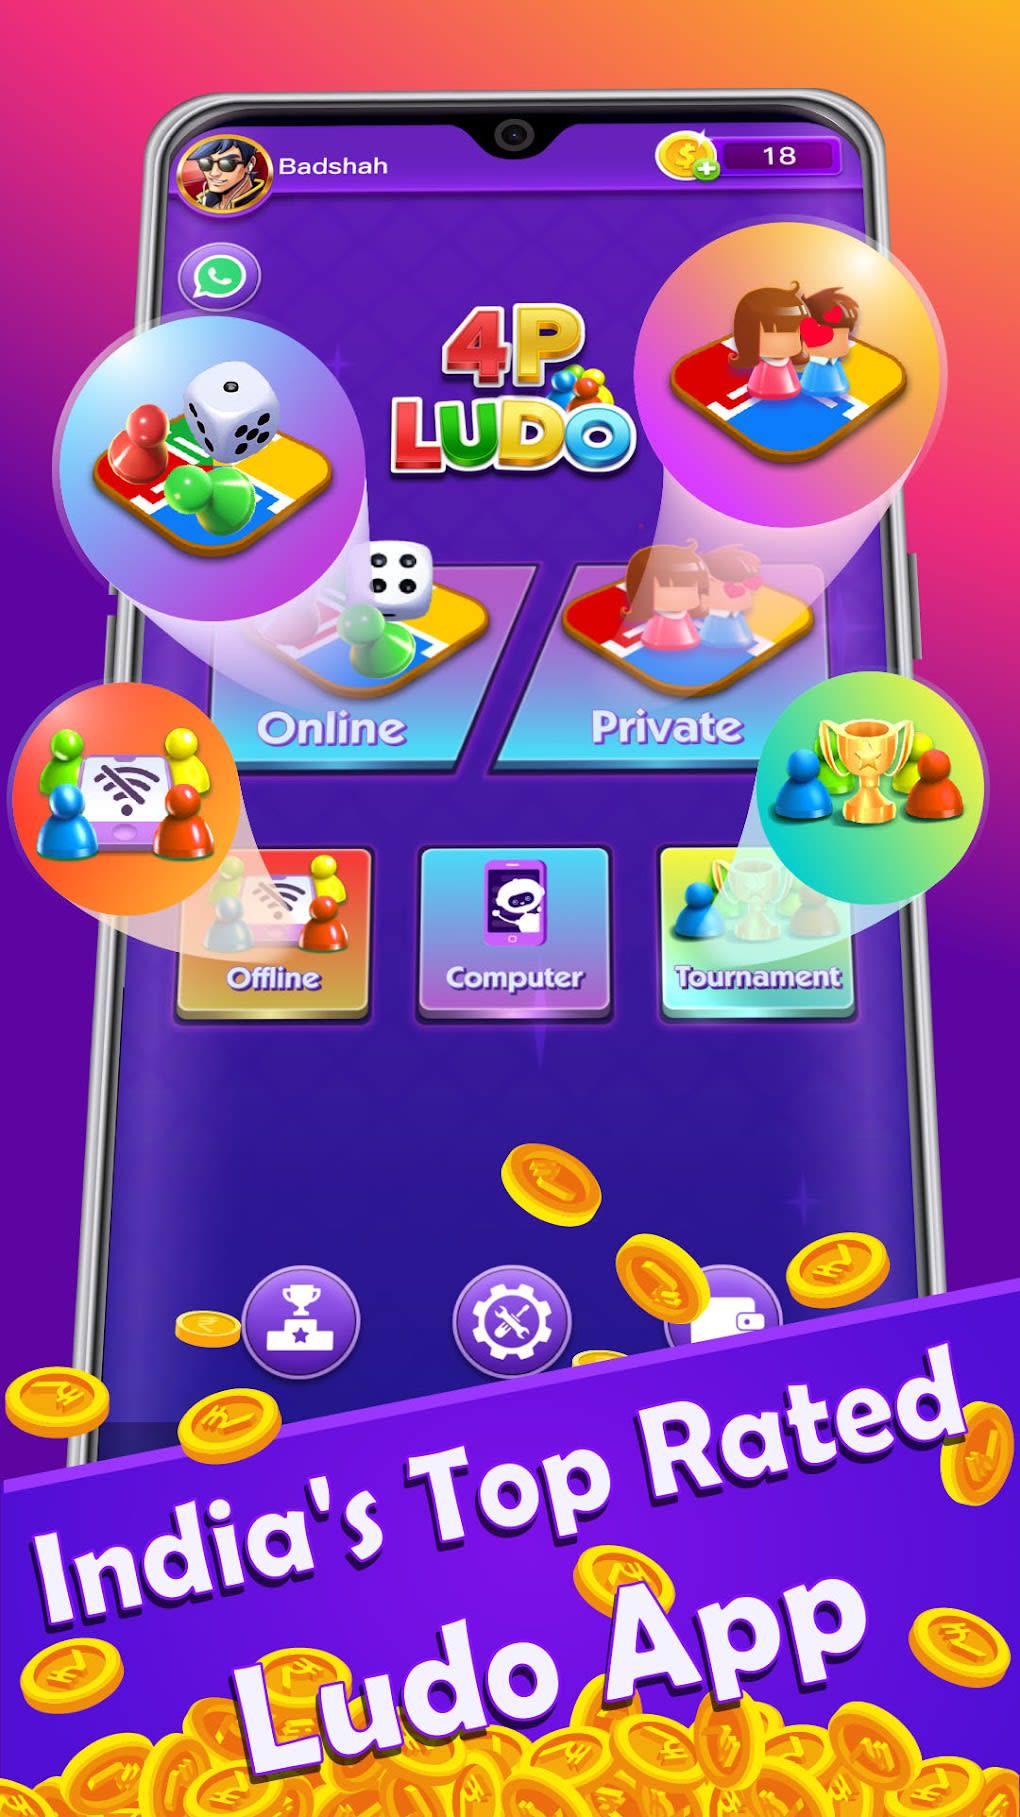 Best Ludo Tournament App  Play Ludo Sikandar & Win Real Cash